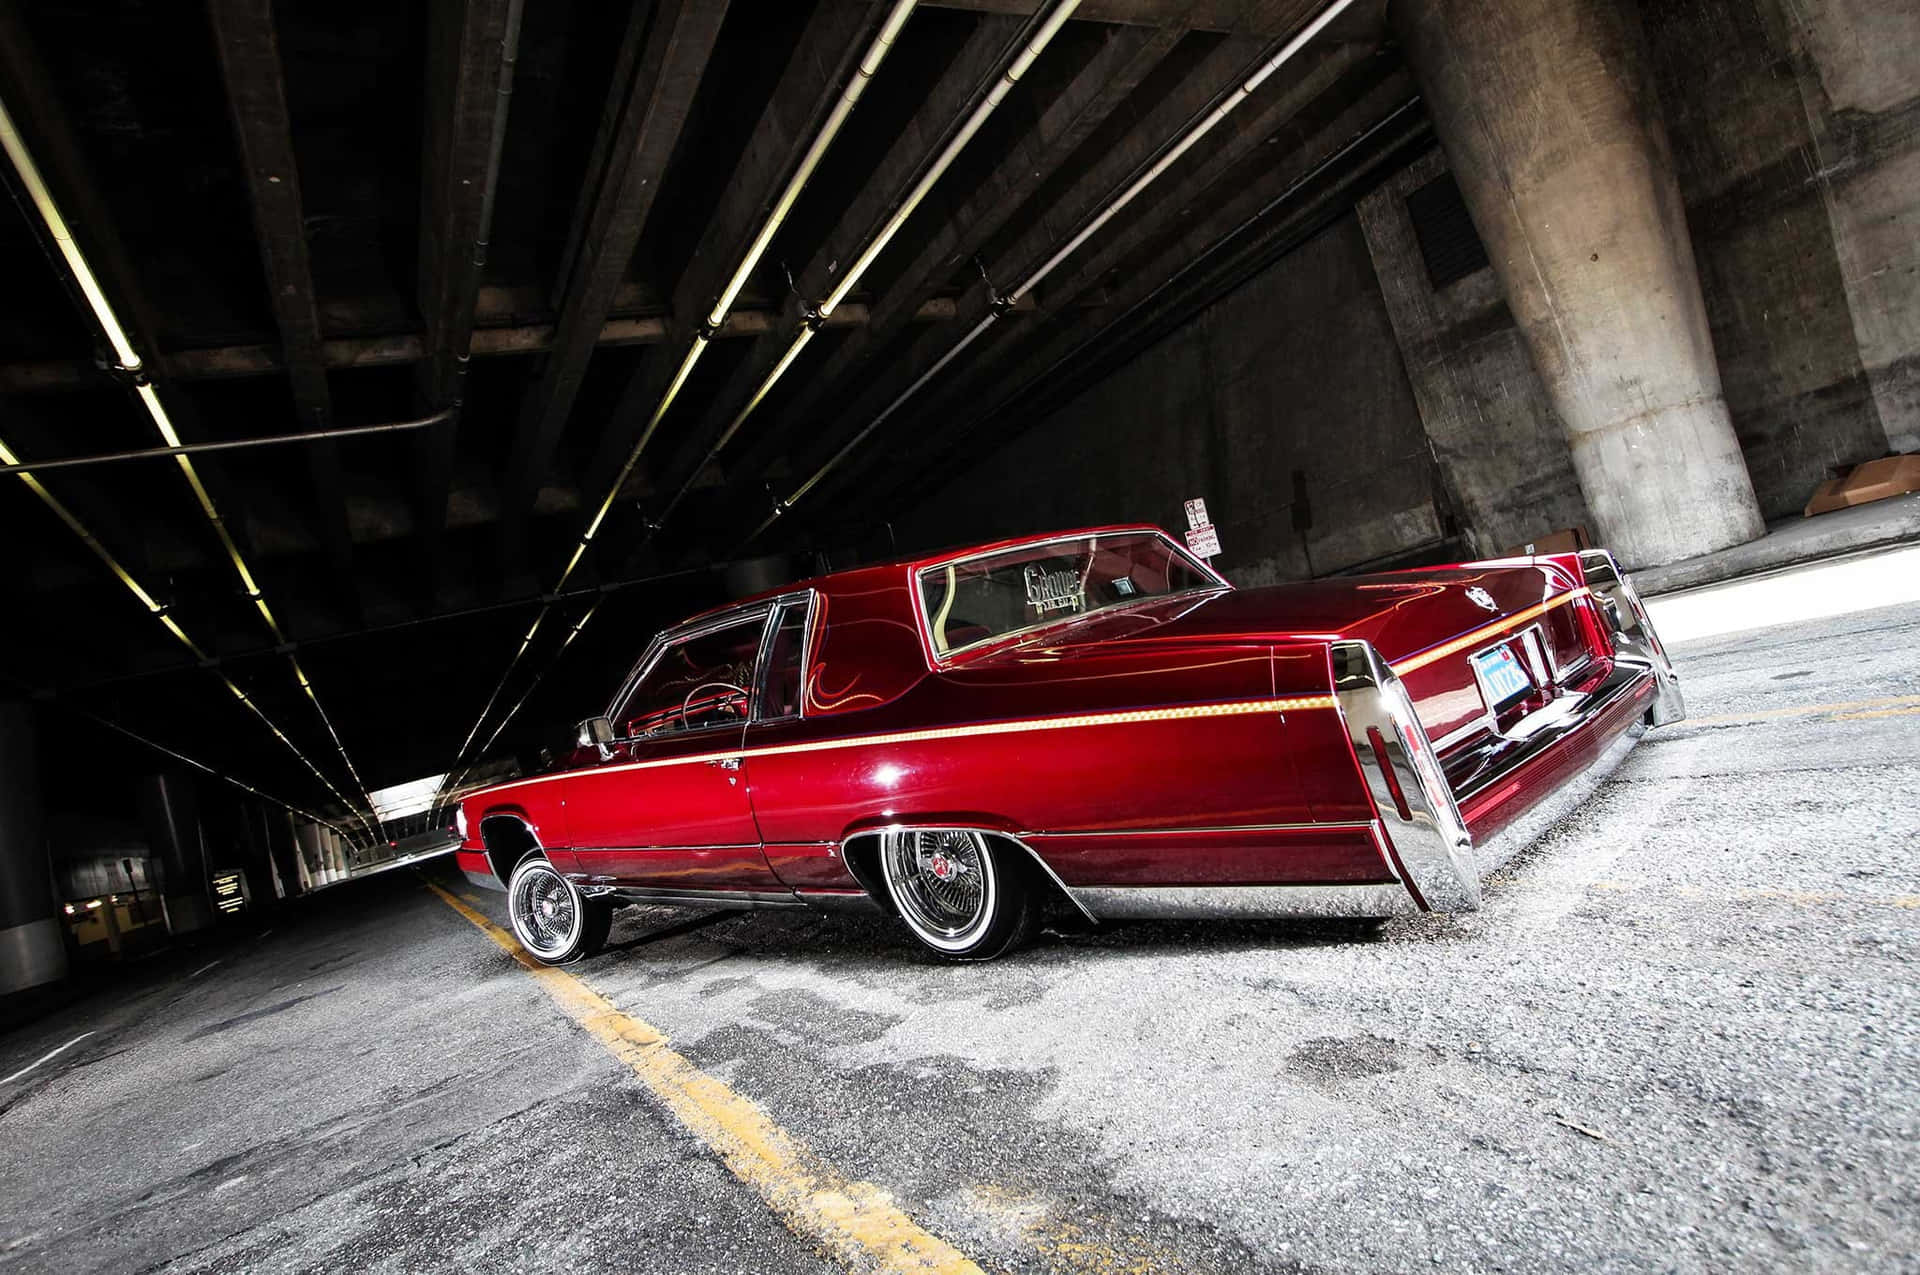 Sleek and Stylish Cadillac Deville Cruising the Road Wallpaper